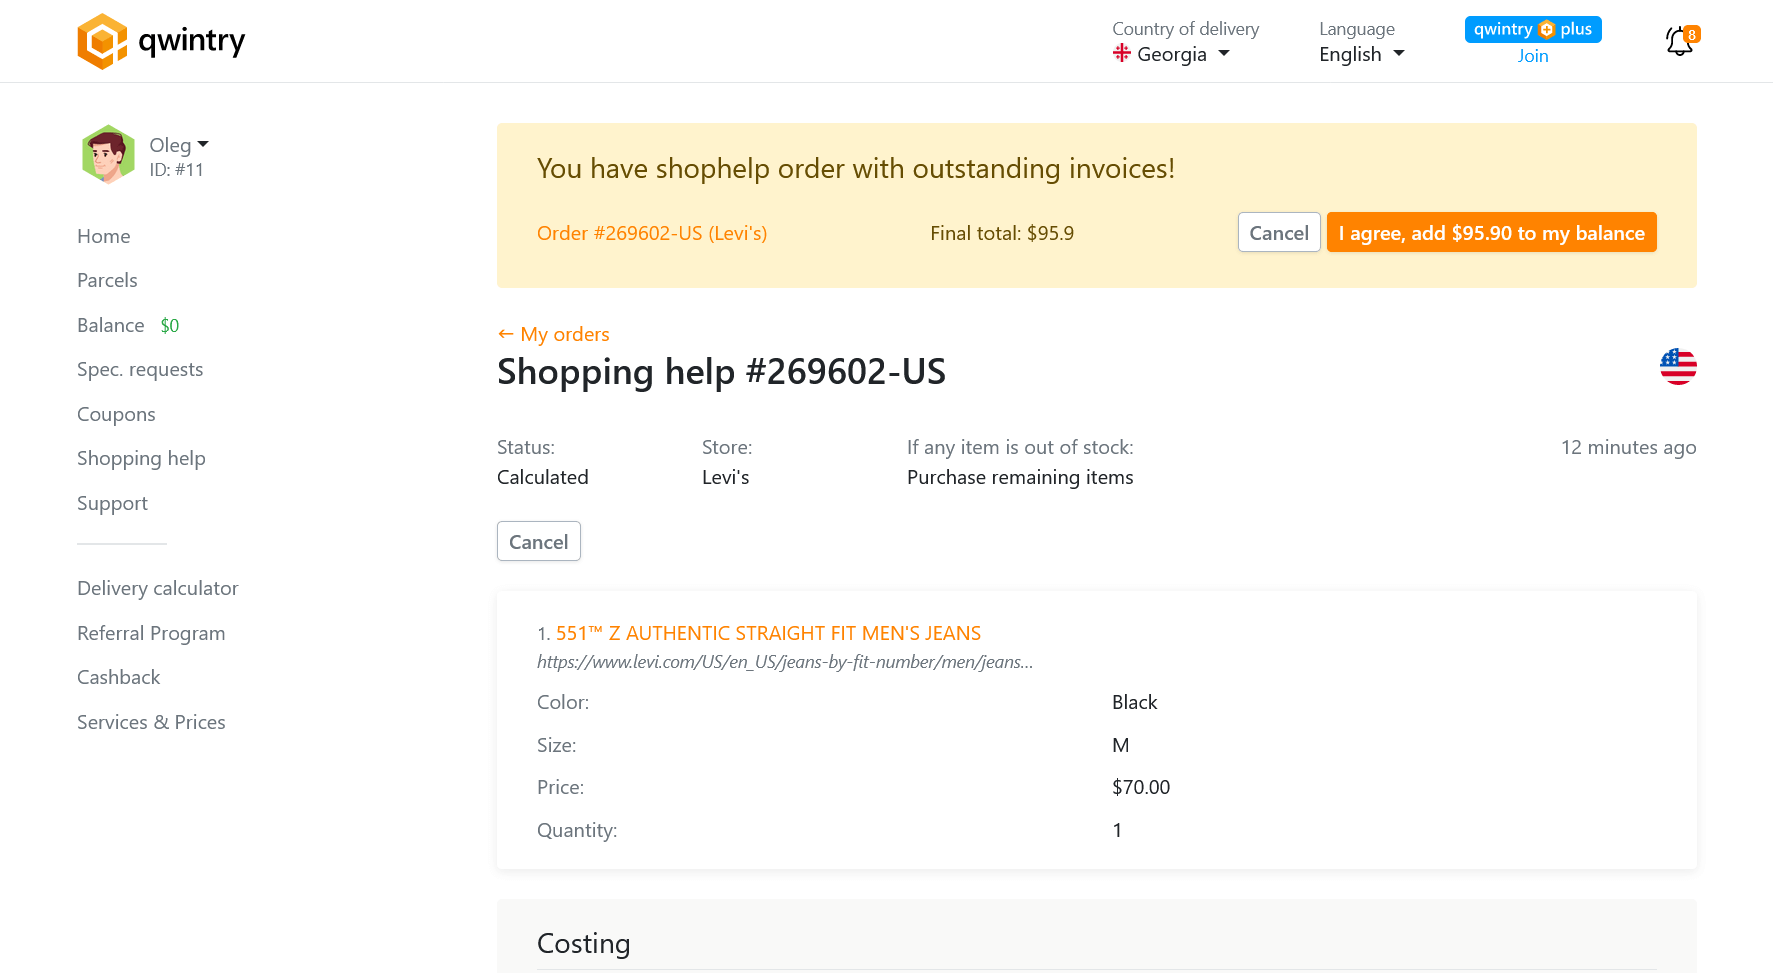 Shopping help | Qwintry